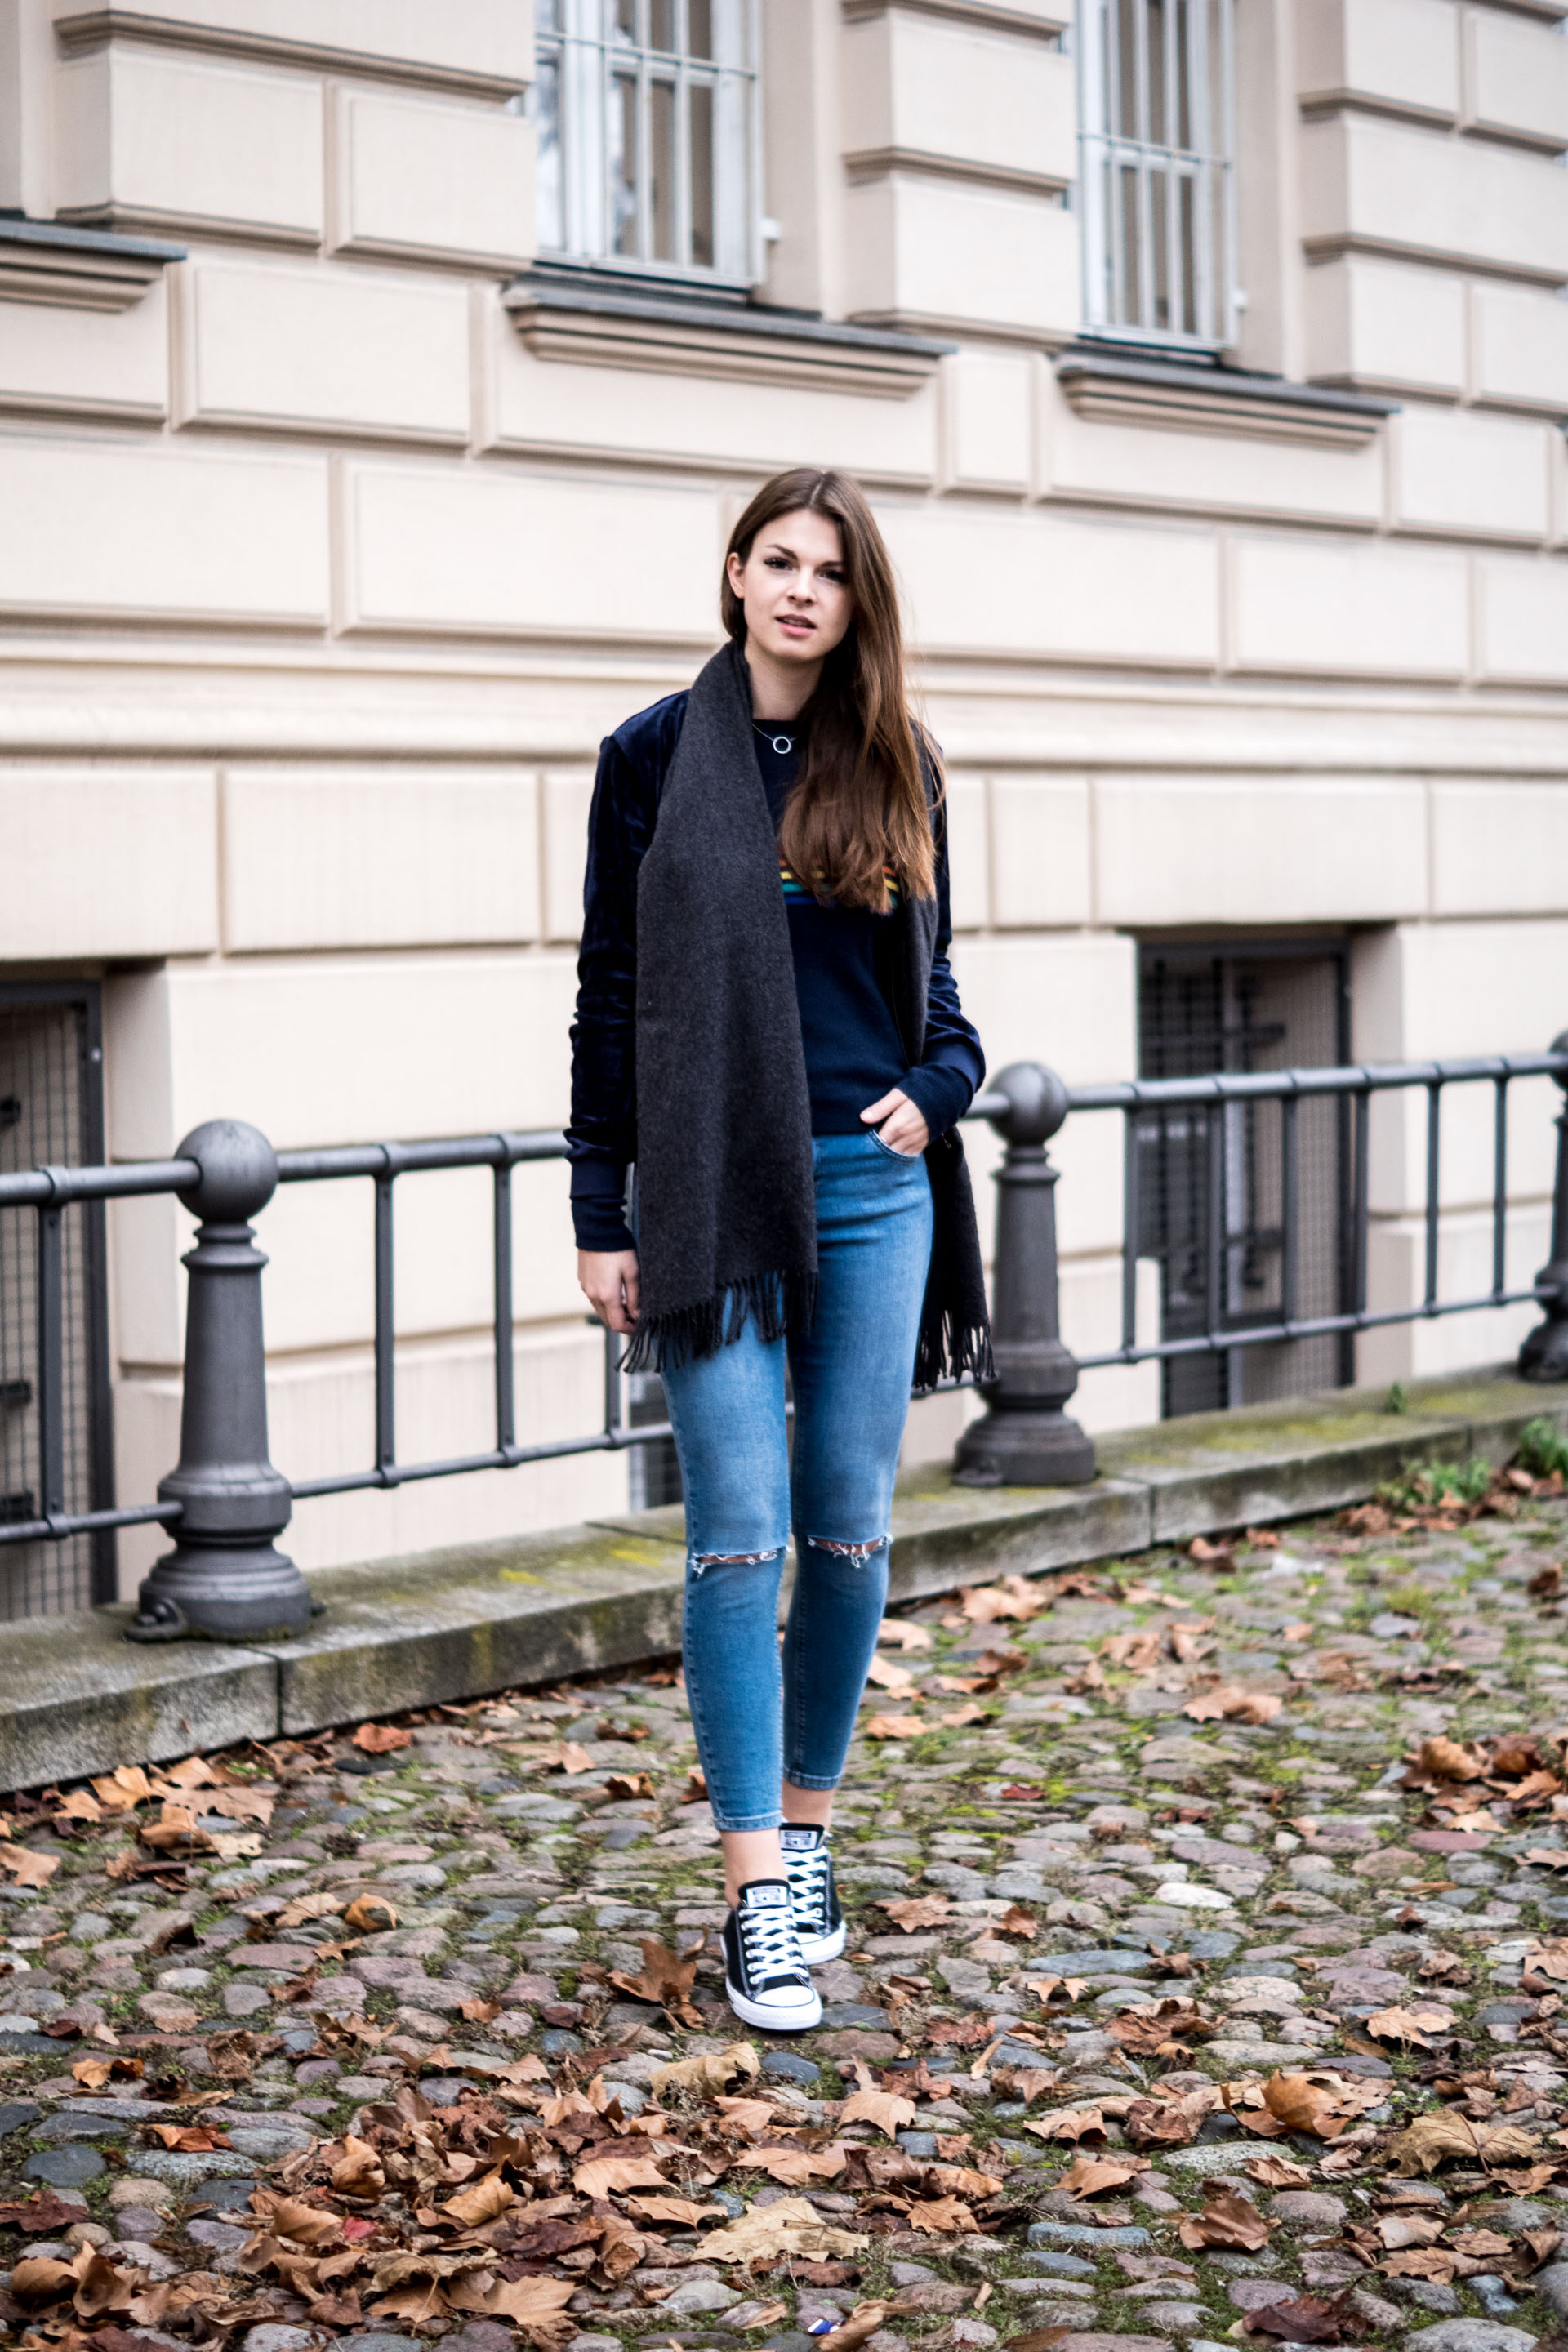 Blue sweater with colourful stripes || Colourful winter outfit